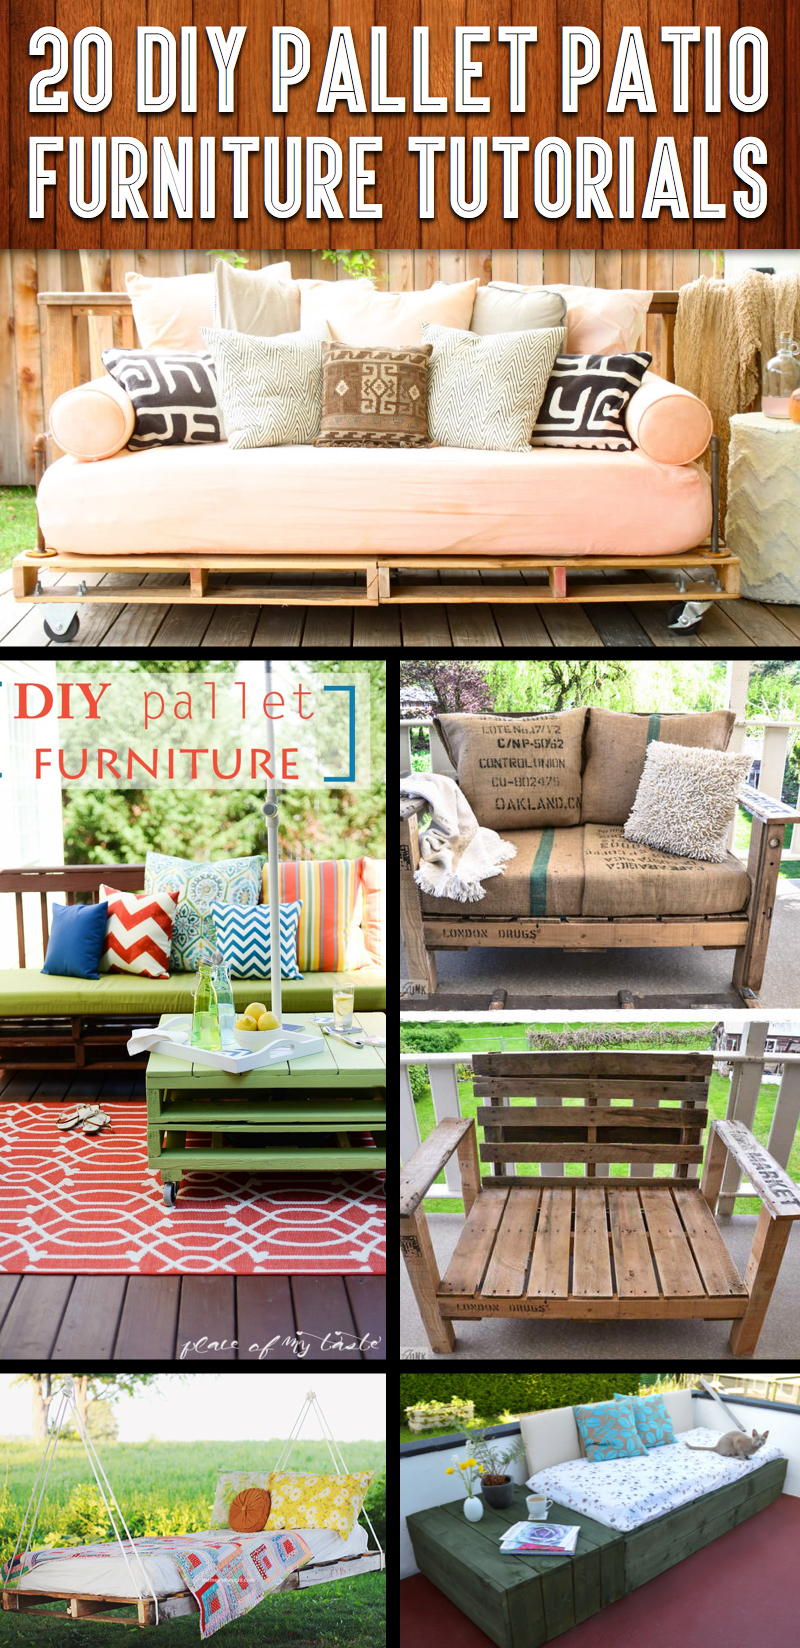 20 Diy Pallet Patio Furniture Tutorials For A Chic And within proportions 800 X 1648